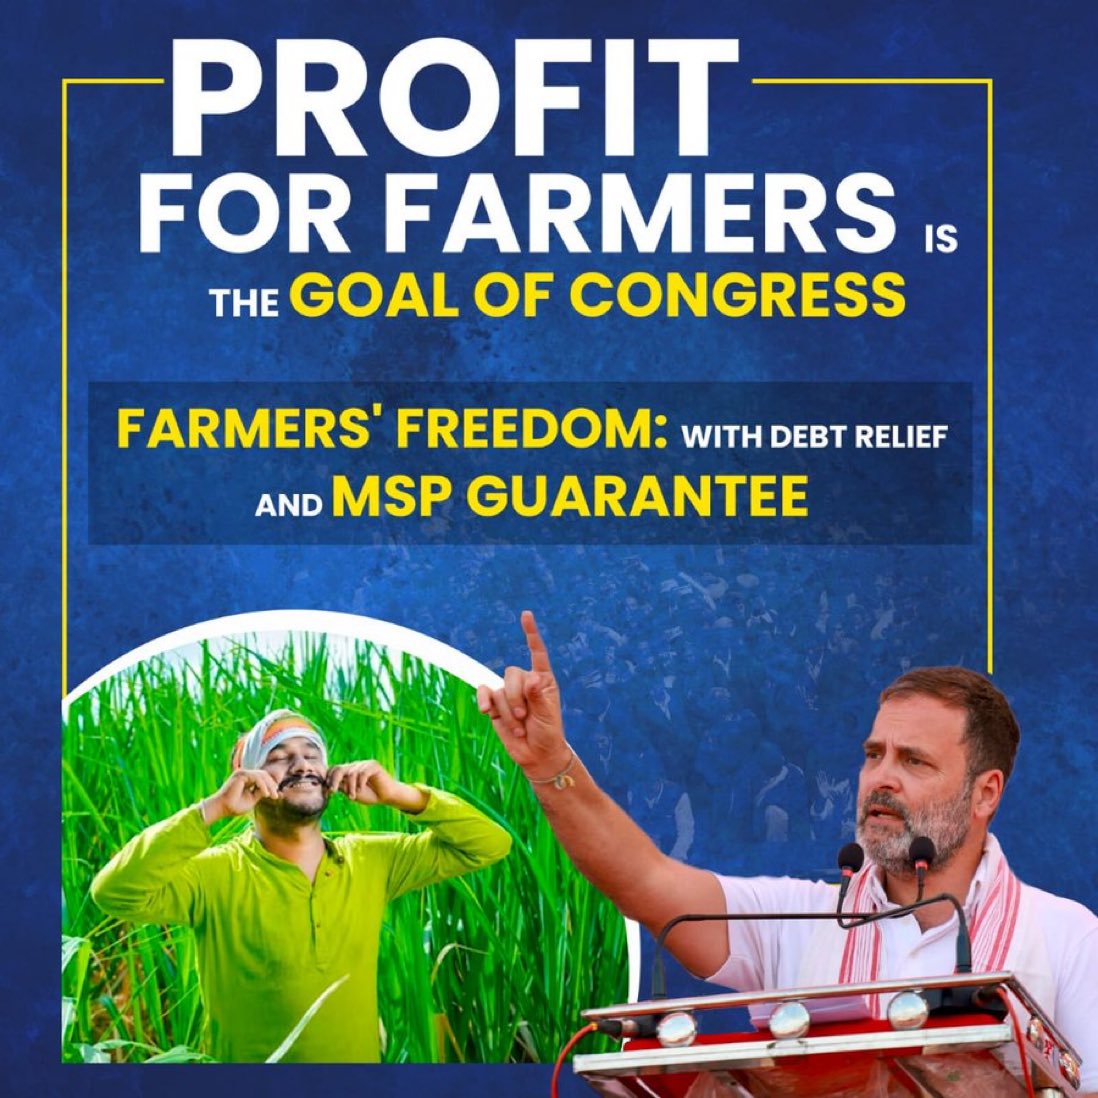 'We will bring the law guaranteeing MSP for various crops to ensure justice for farmers. This has been the long pending demand of farmers across the country.'#KisanoKoNyayDo